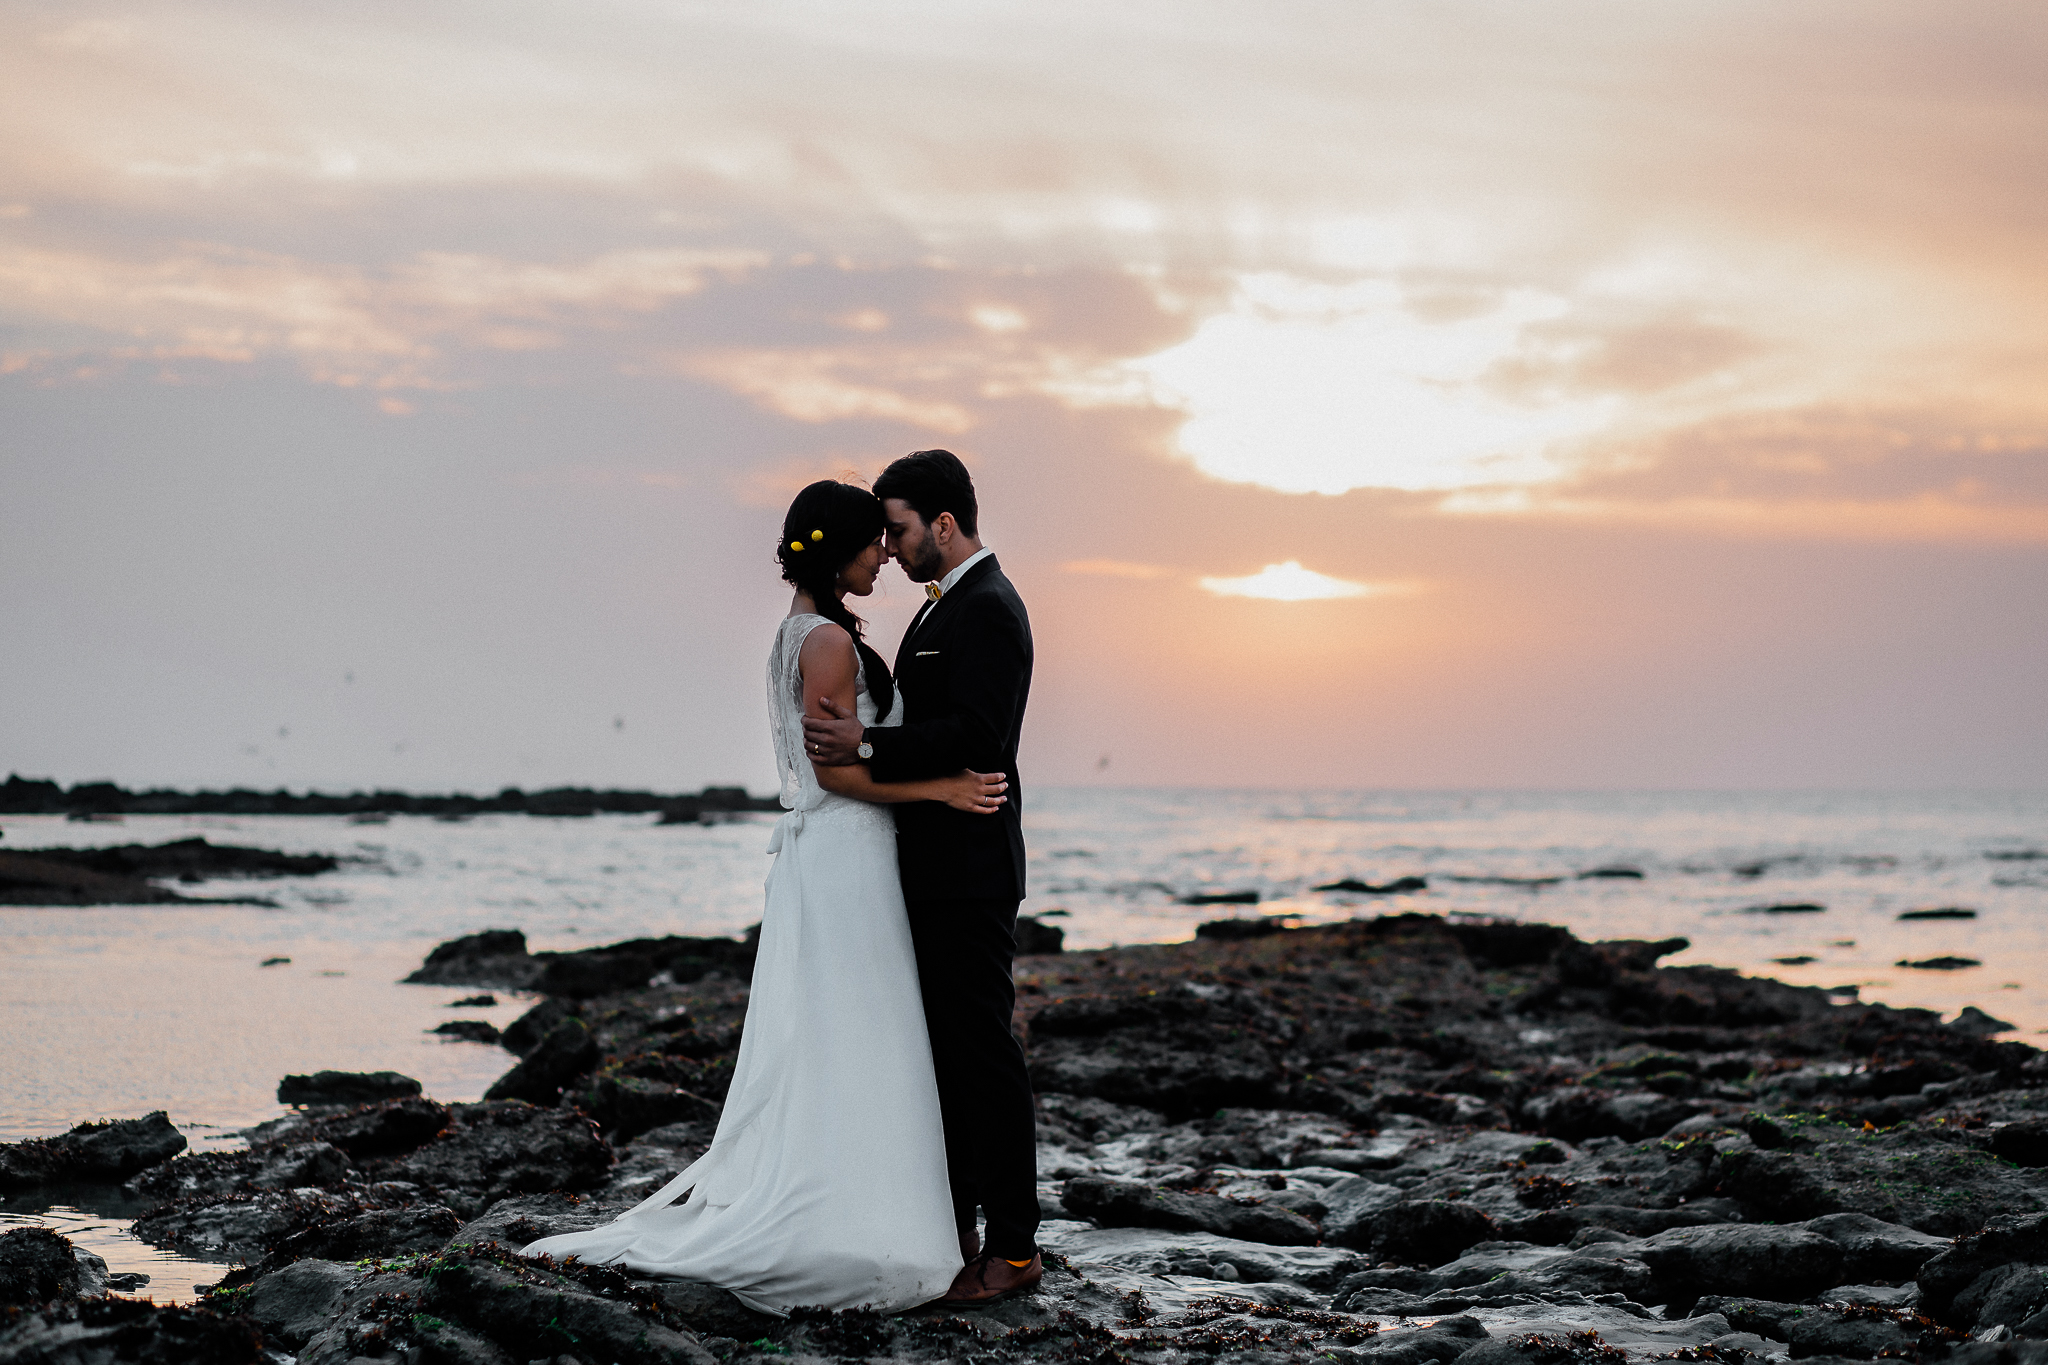 Day After, After Day, Mariage Côte d'Opale, Photographe de mariage Côte d'Opale, Dixie Martin Photography, plage, beach, sunset, coucher